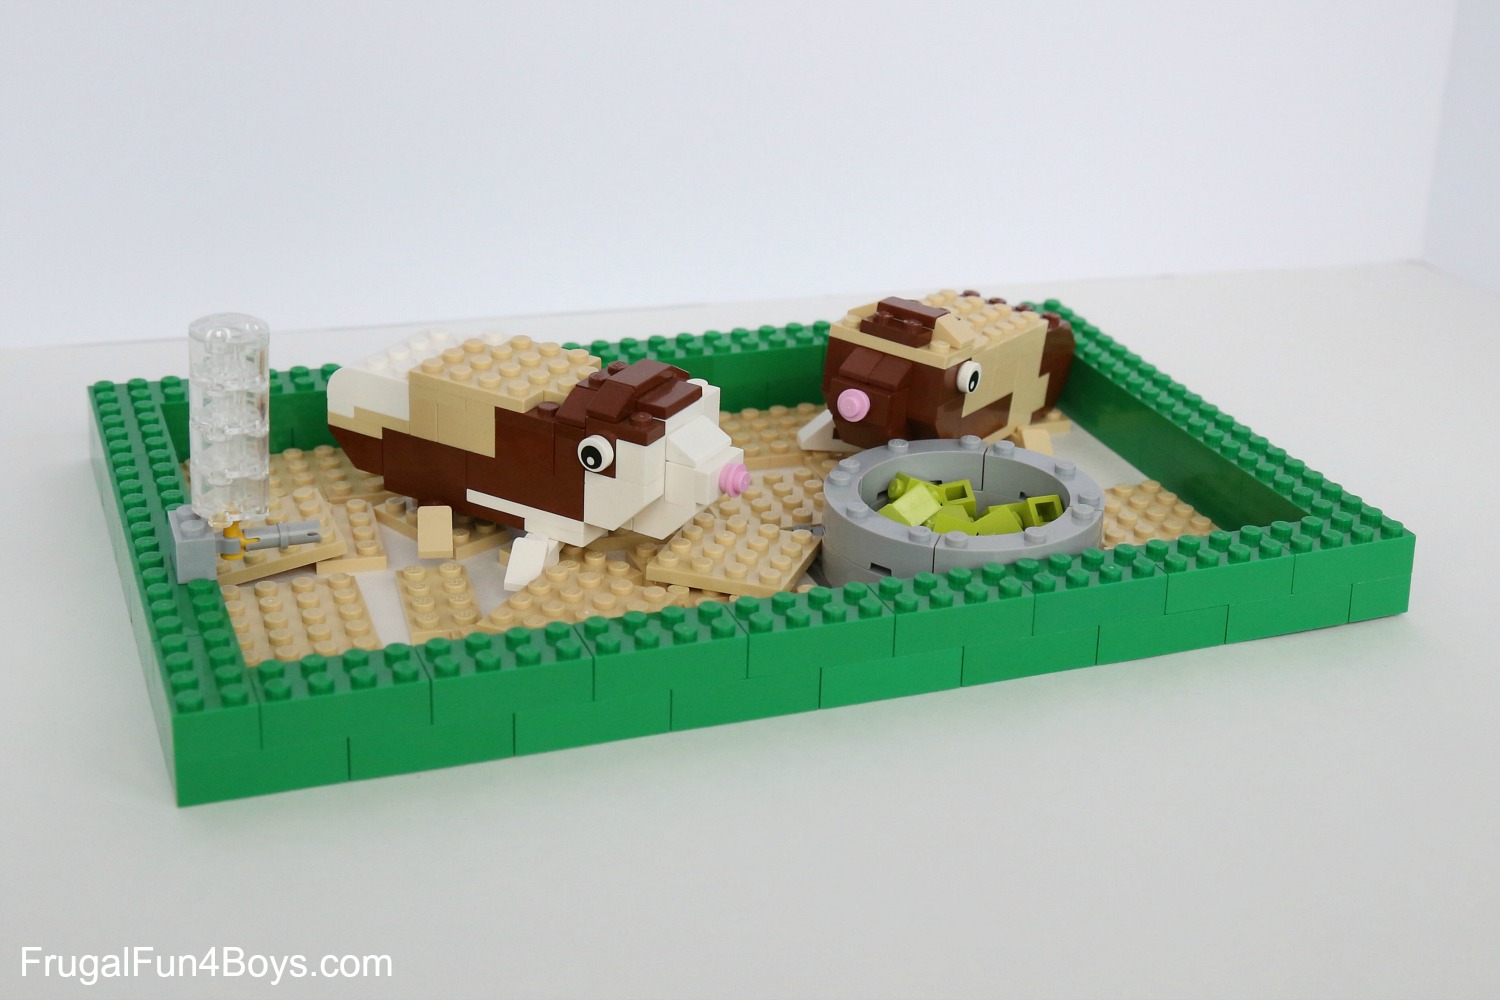 LEGO Pets! Building Instructions for Dogs, Cats, Guinea Pigs, Fish, and More!